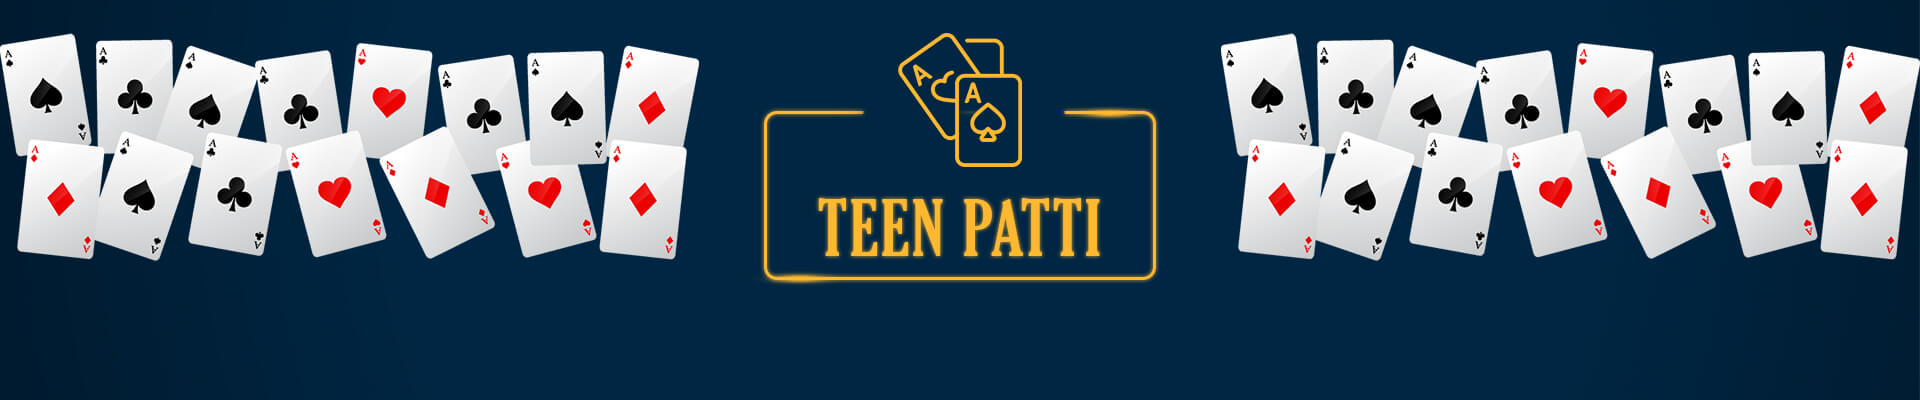 Teen Patti Game Development Company | Teen Patti Game Developers for Hire